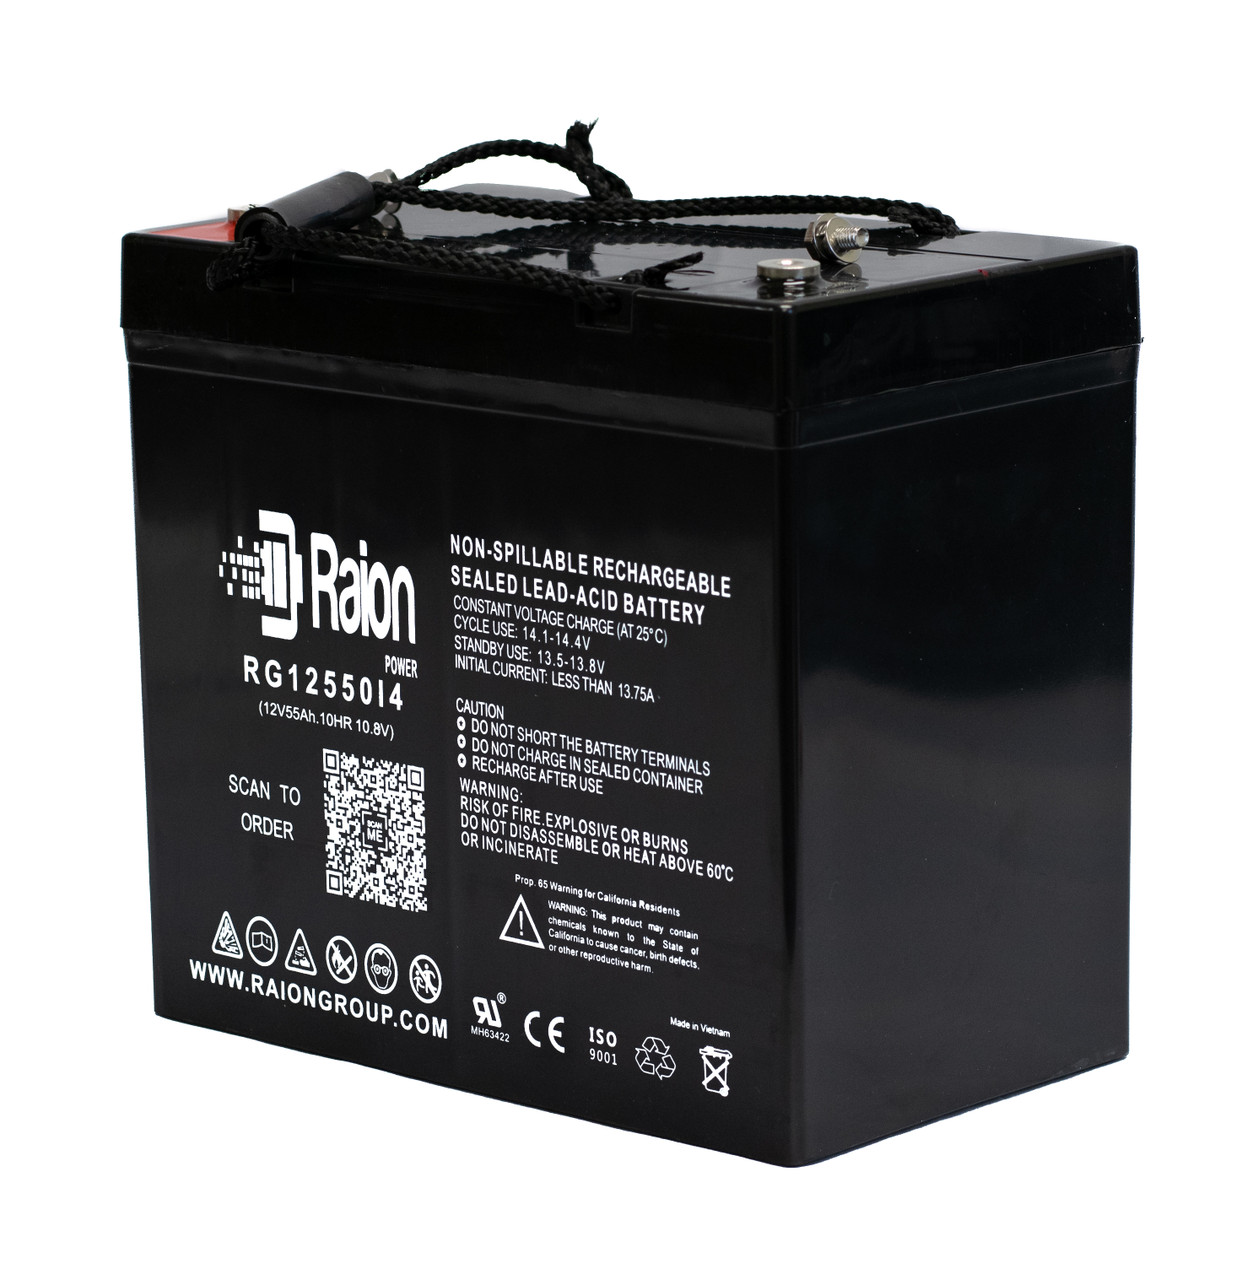 Raion Power 12V 55Ah 22NF Mobility Scooter Battery Replacement for Electric Mobility 2 Seat Cycle Chair